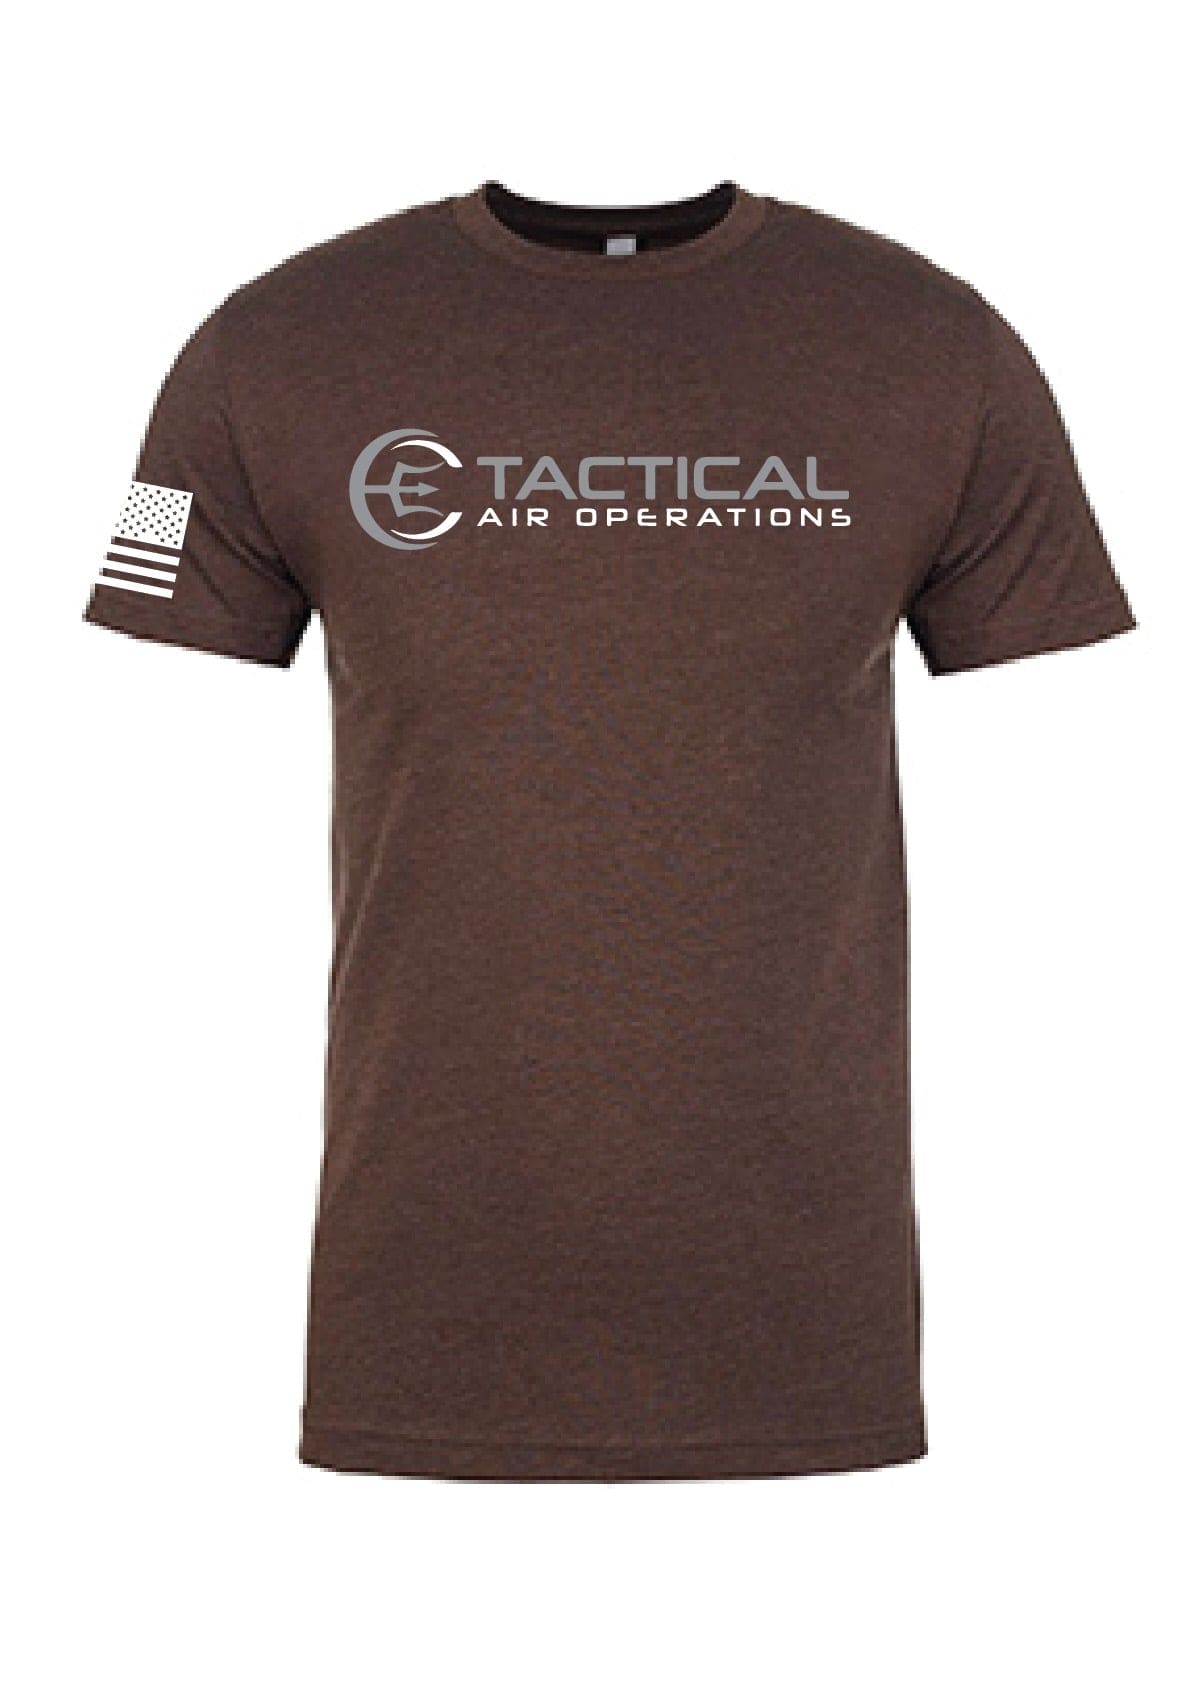 Tactical Air Operations T-Shirt Vintage Brown - Skydive San Diego Retail